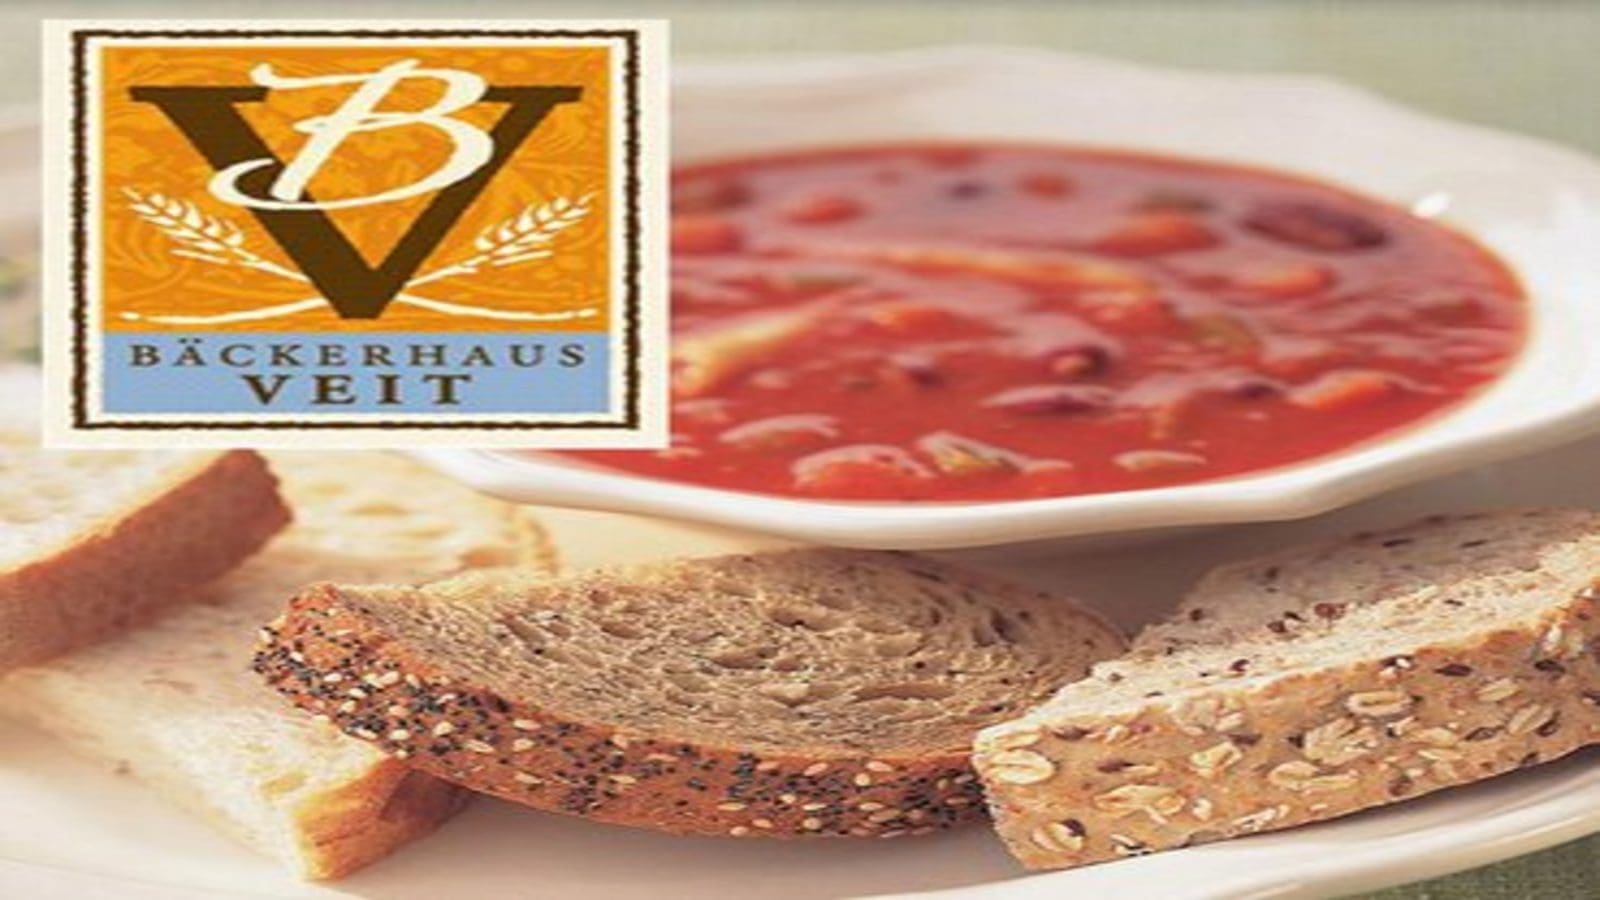 Canadian bread maker Backerhaus Veit acquired by private equity firm PNC Riverarch Capital